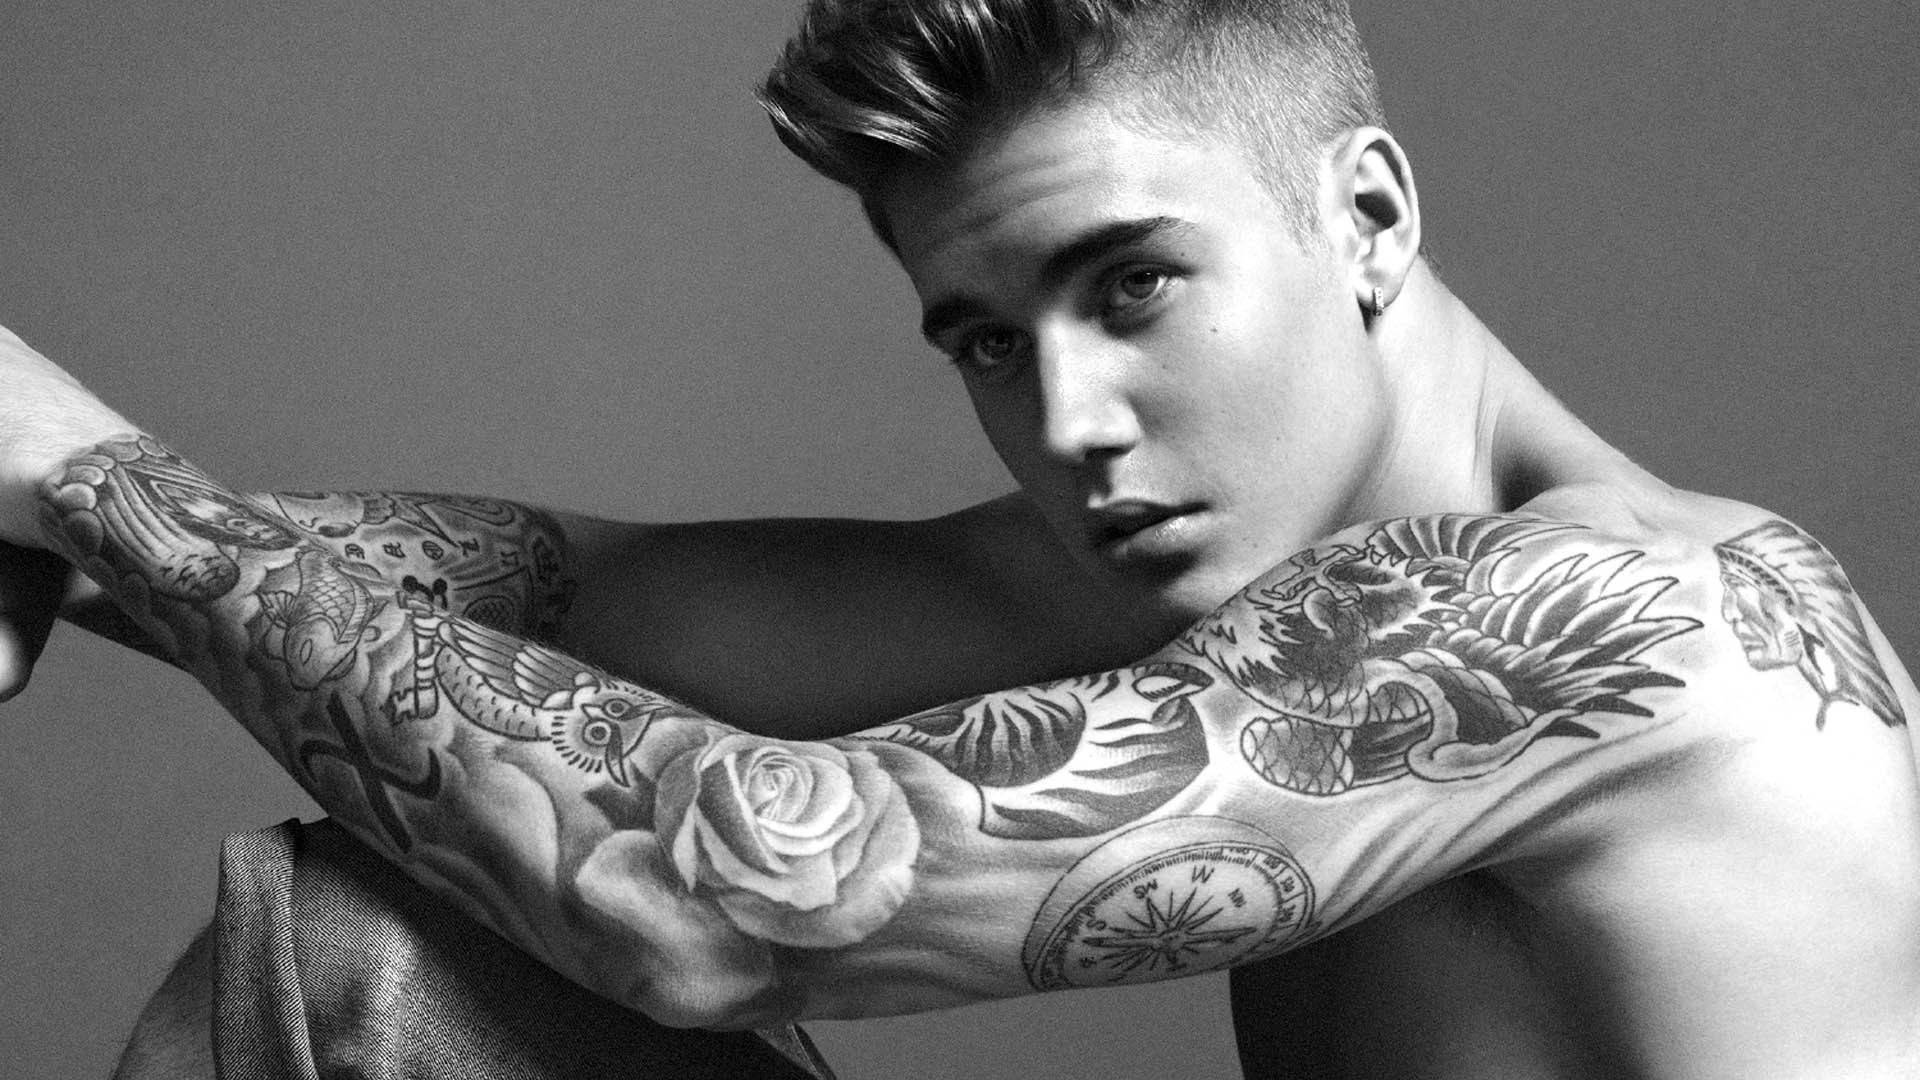 Justin Bieber 1920X1080 Wallpaper and Background Image